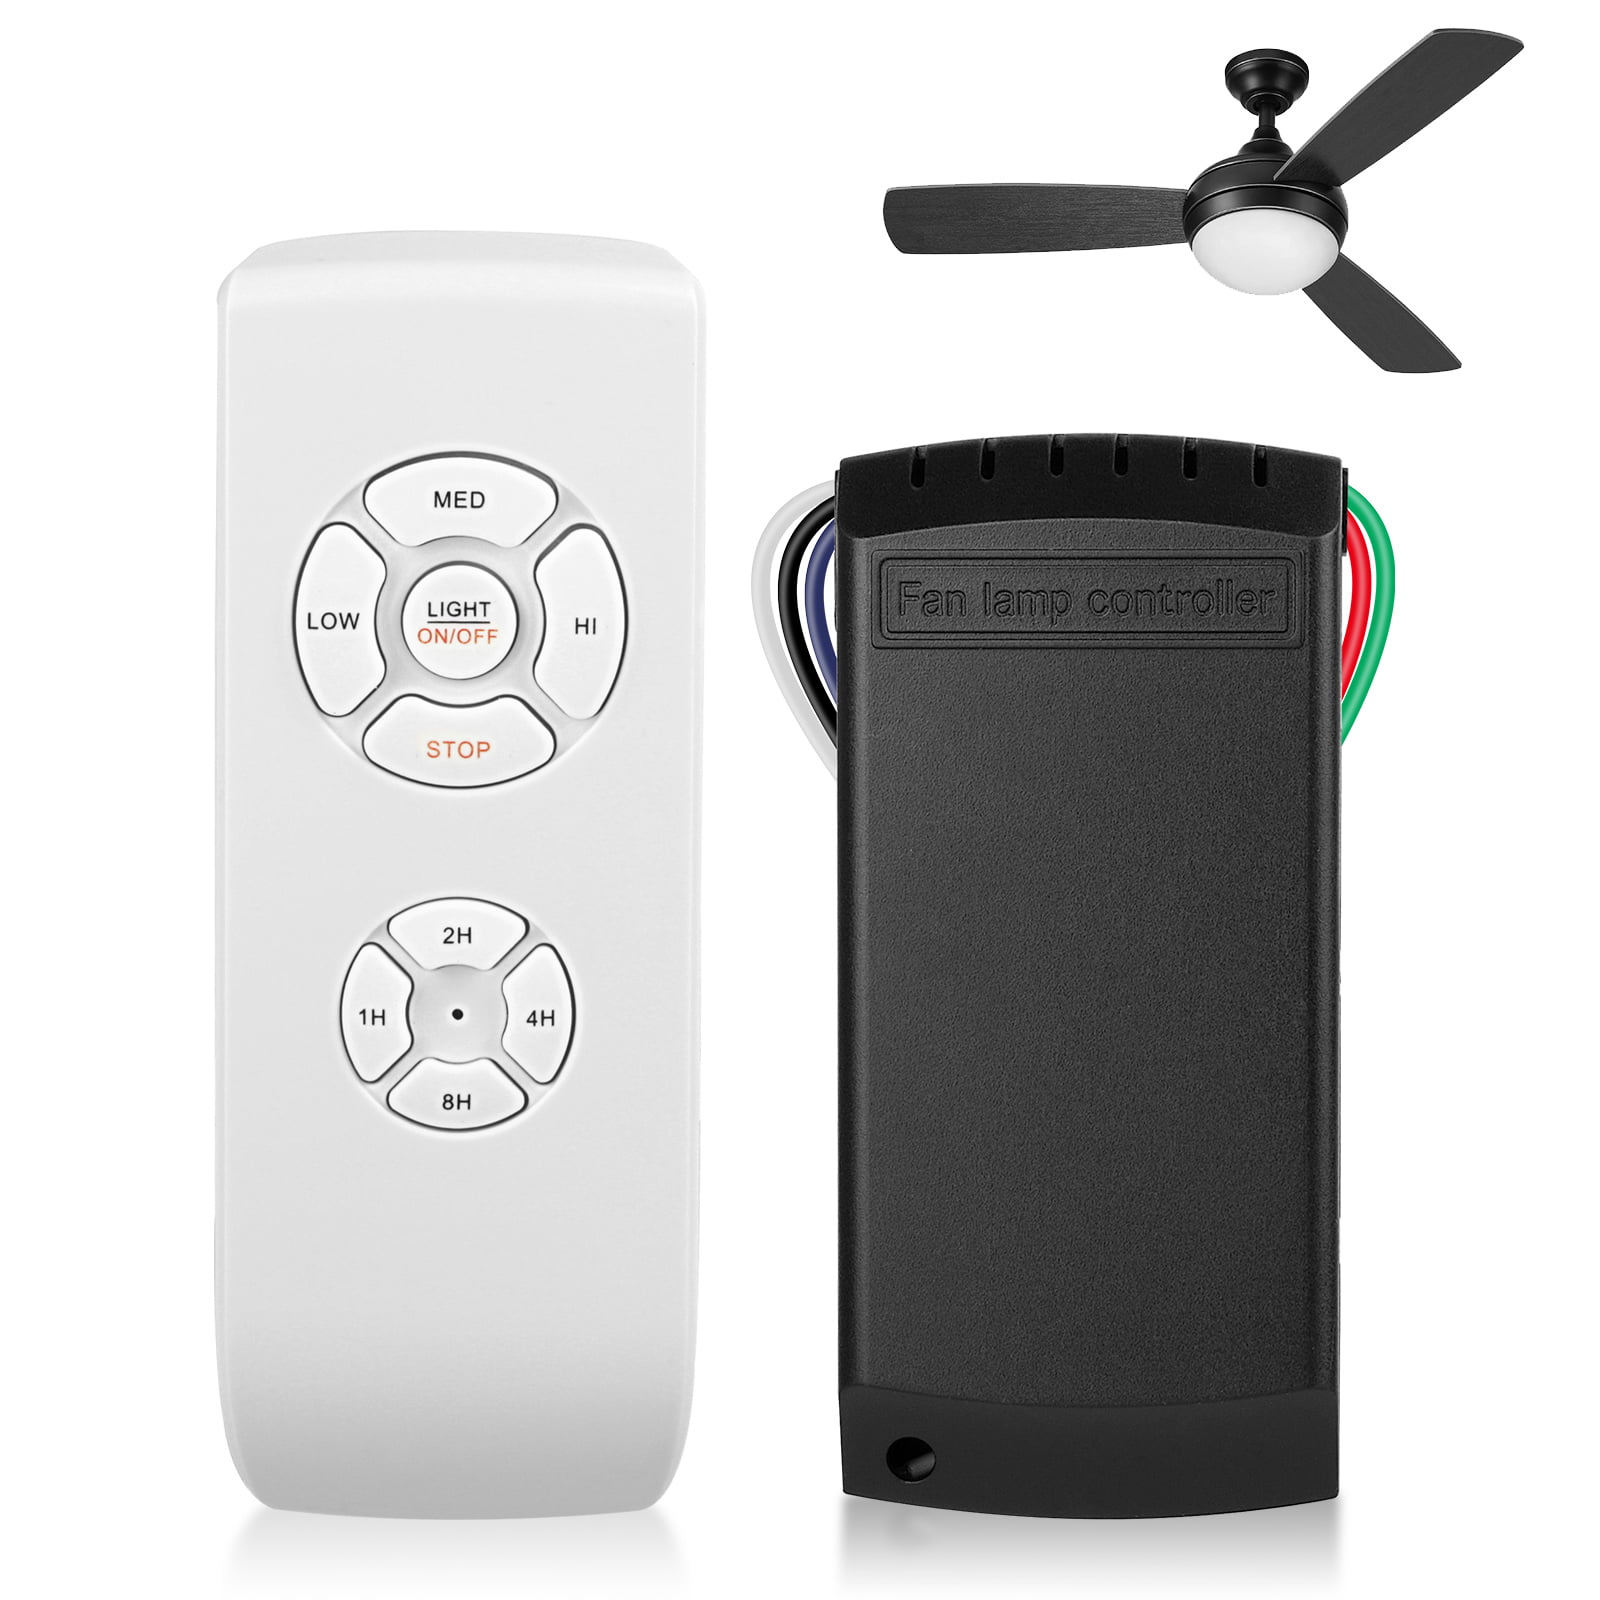 New Universal Ceiling Fan light Remote Control Receiver Kit Timing Wireless US